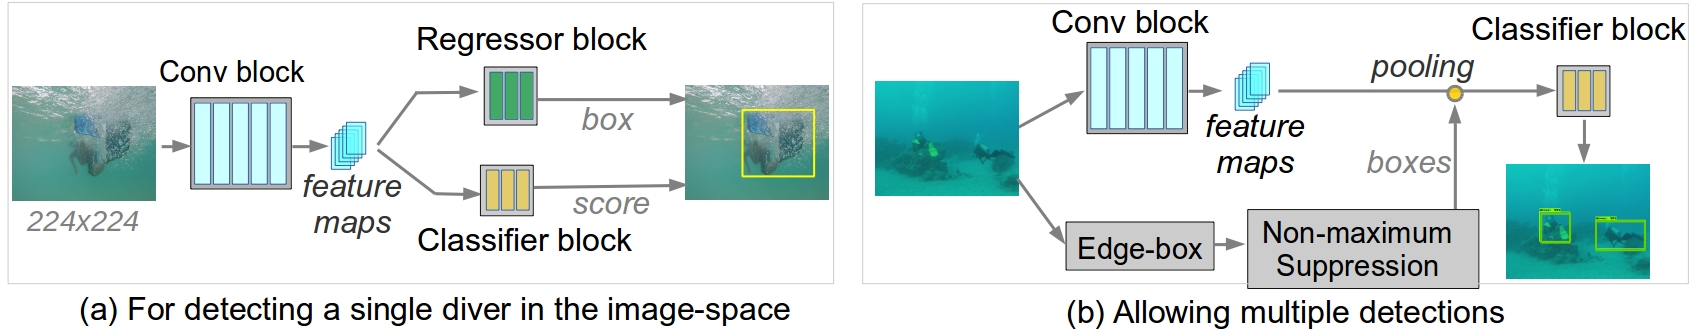 proposed_diver_detection